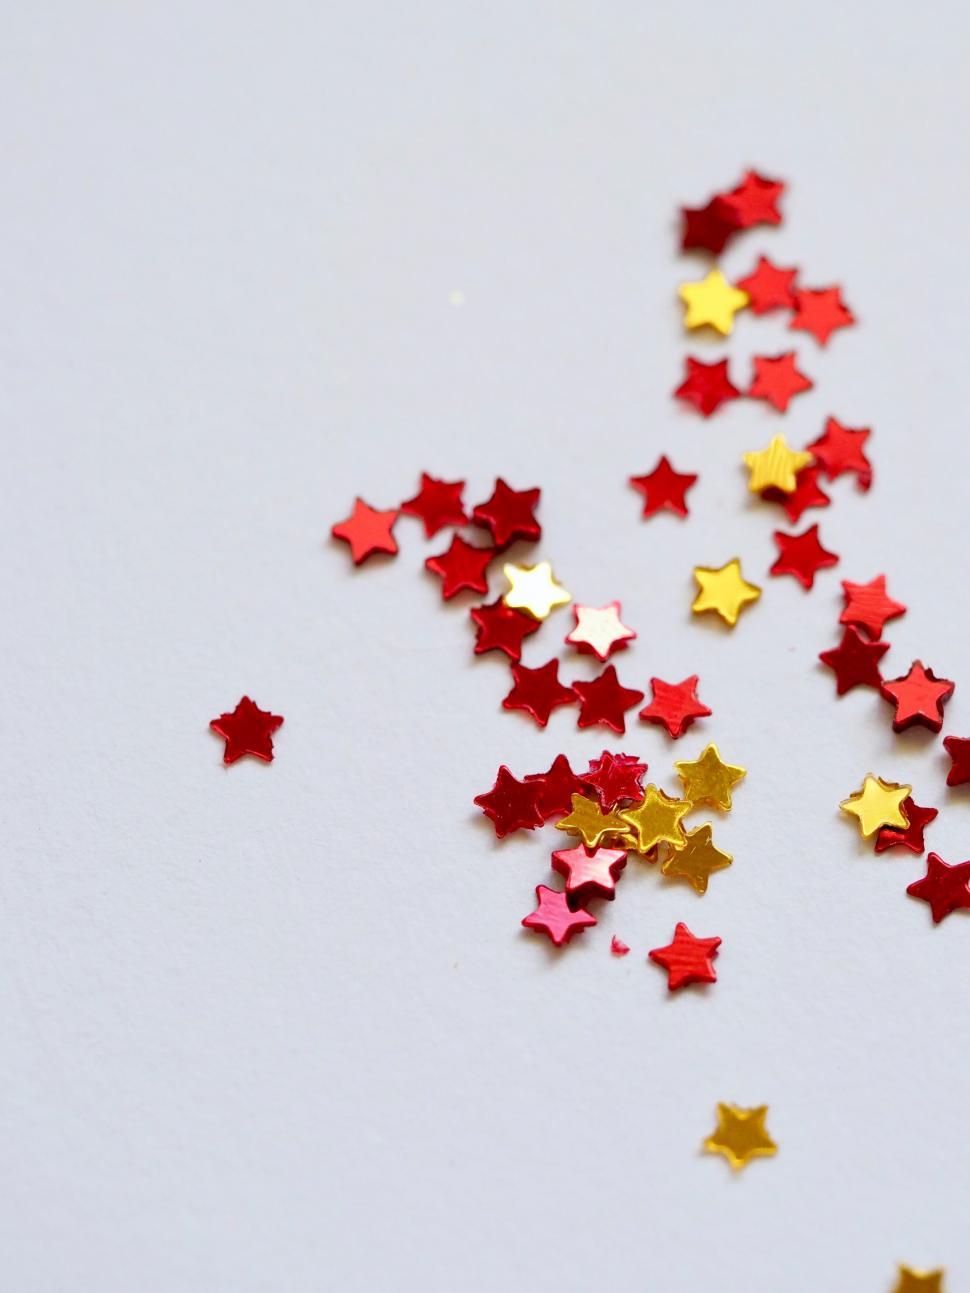 Free Image of Red and gold star confetti on light background 